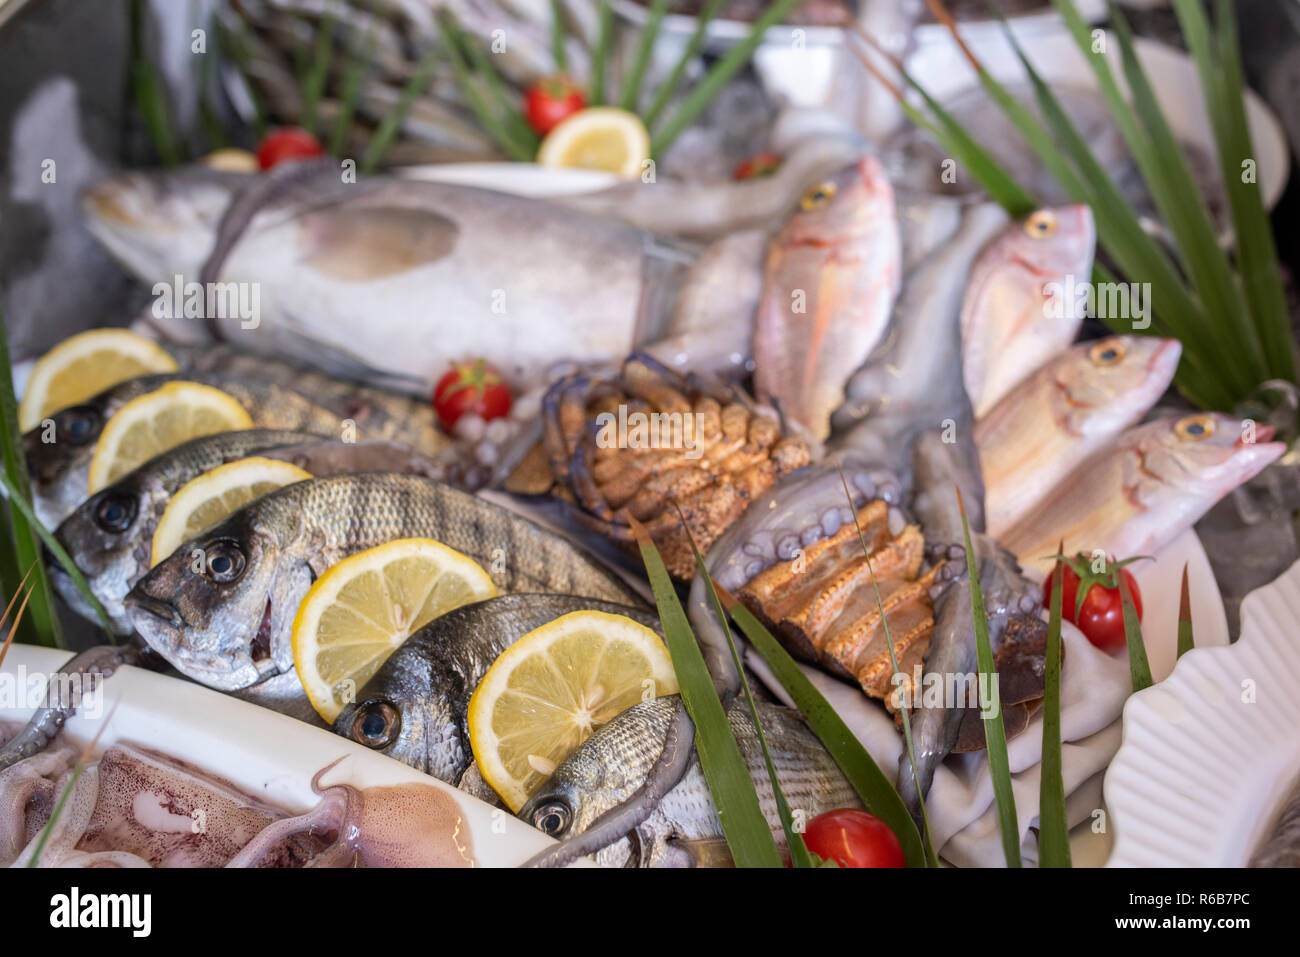 Lobster, octopus, cuttlefish, squid, calamari, red mullet, grouper, sea bass, sea bream, bogue fish, crab and prawns on ice at the supermarket Stock Photo